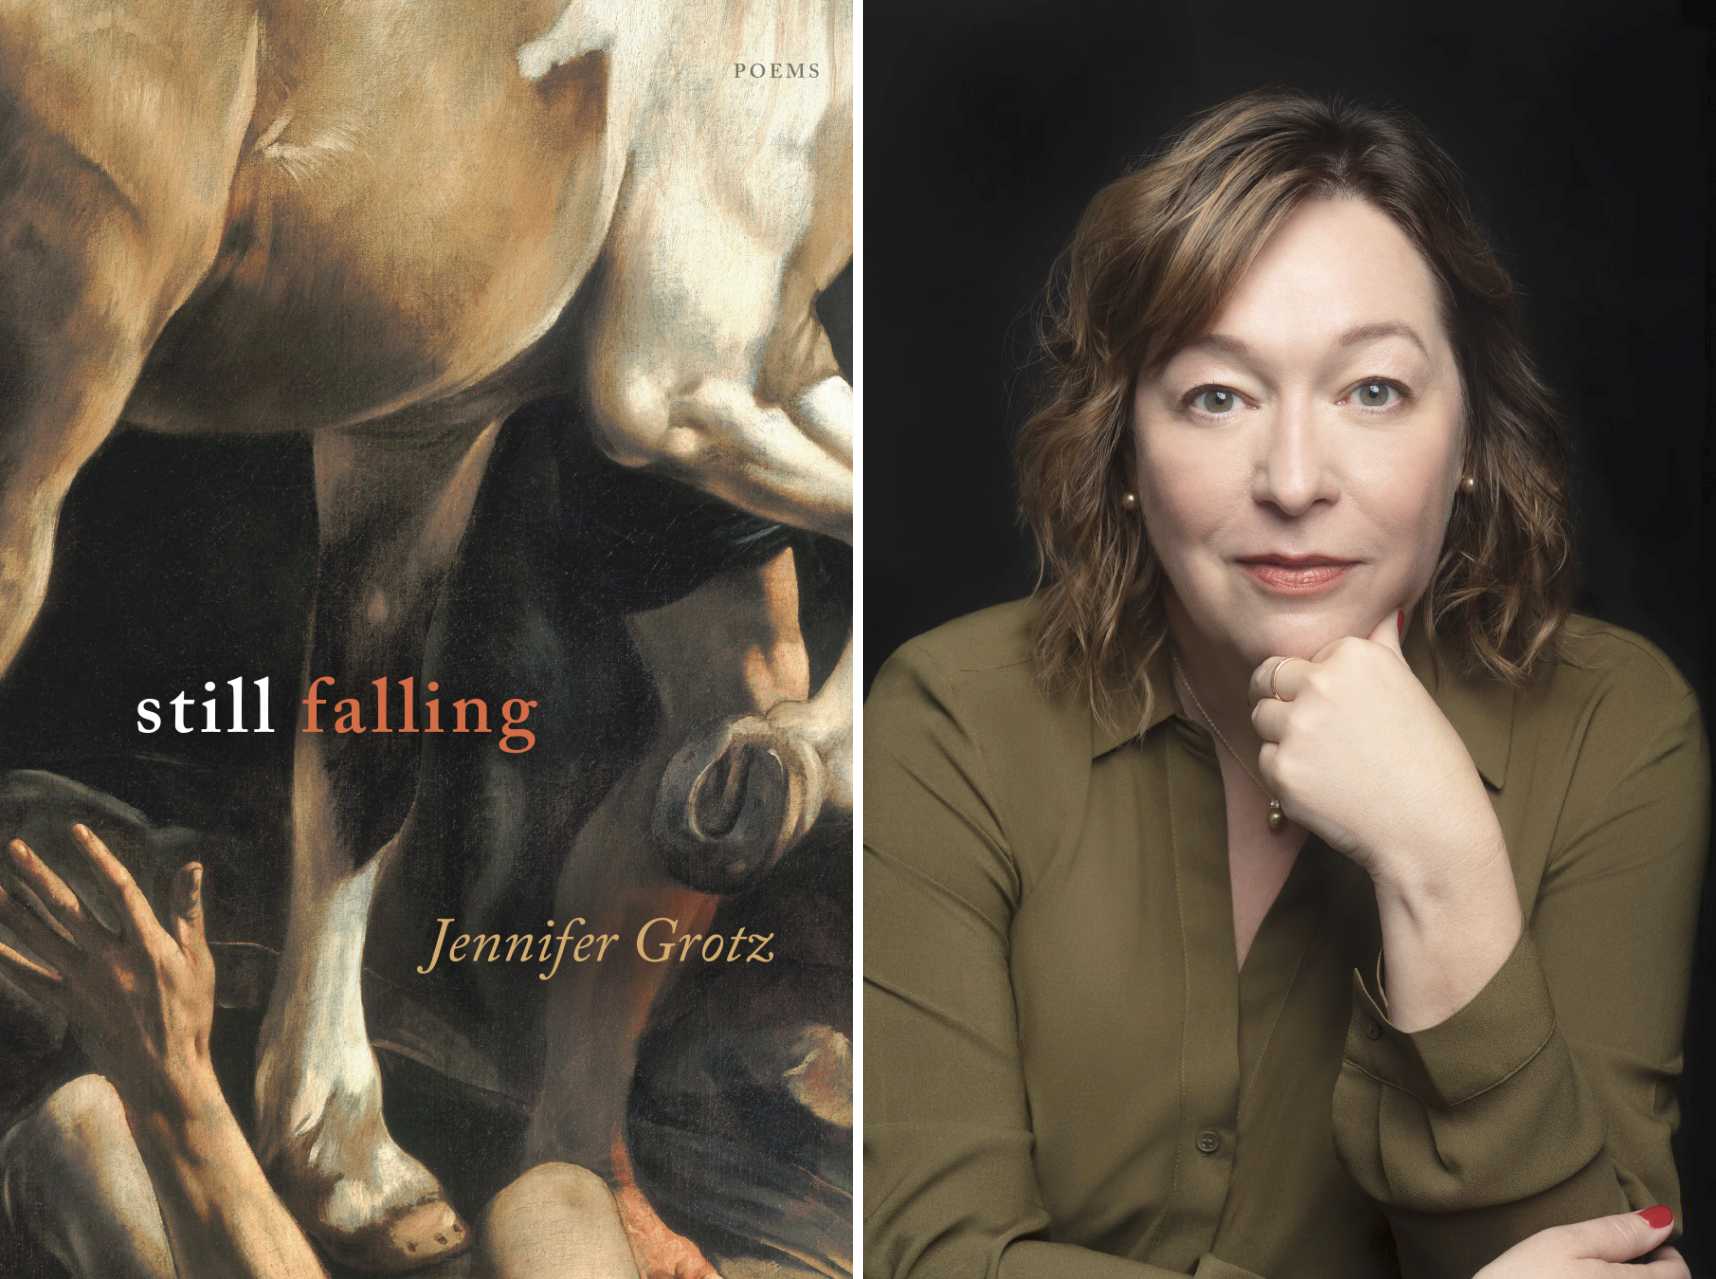 Diptych featuring the cover art for "Still Falling" by Jennifer Grotz and a headshot of the author looking directly at camera.